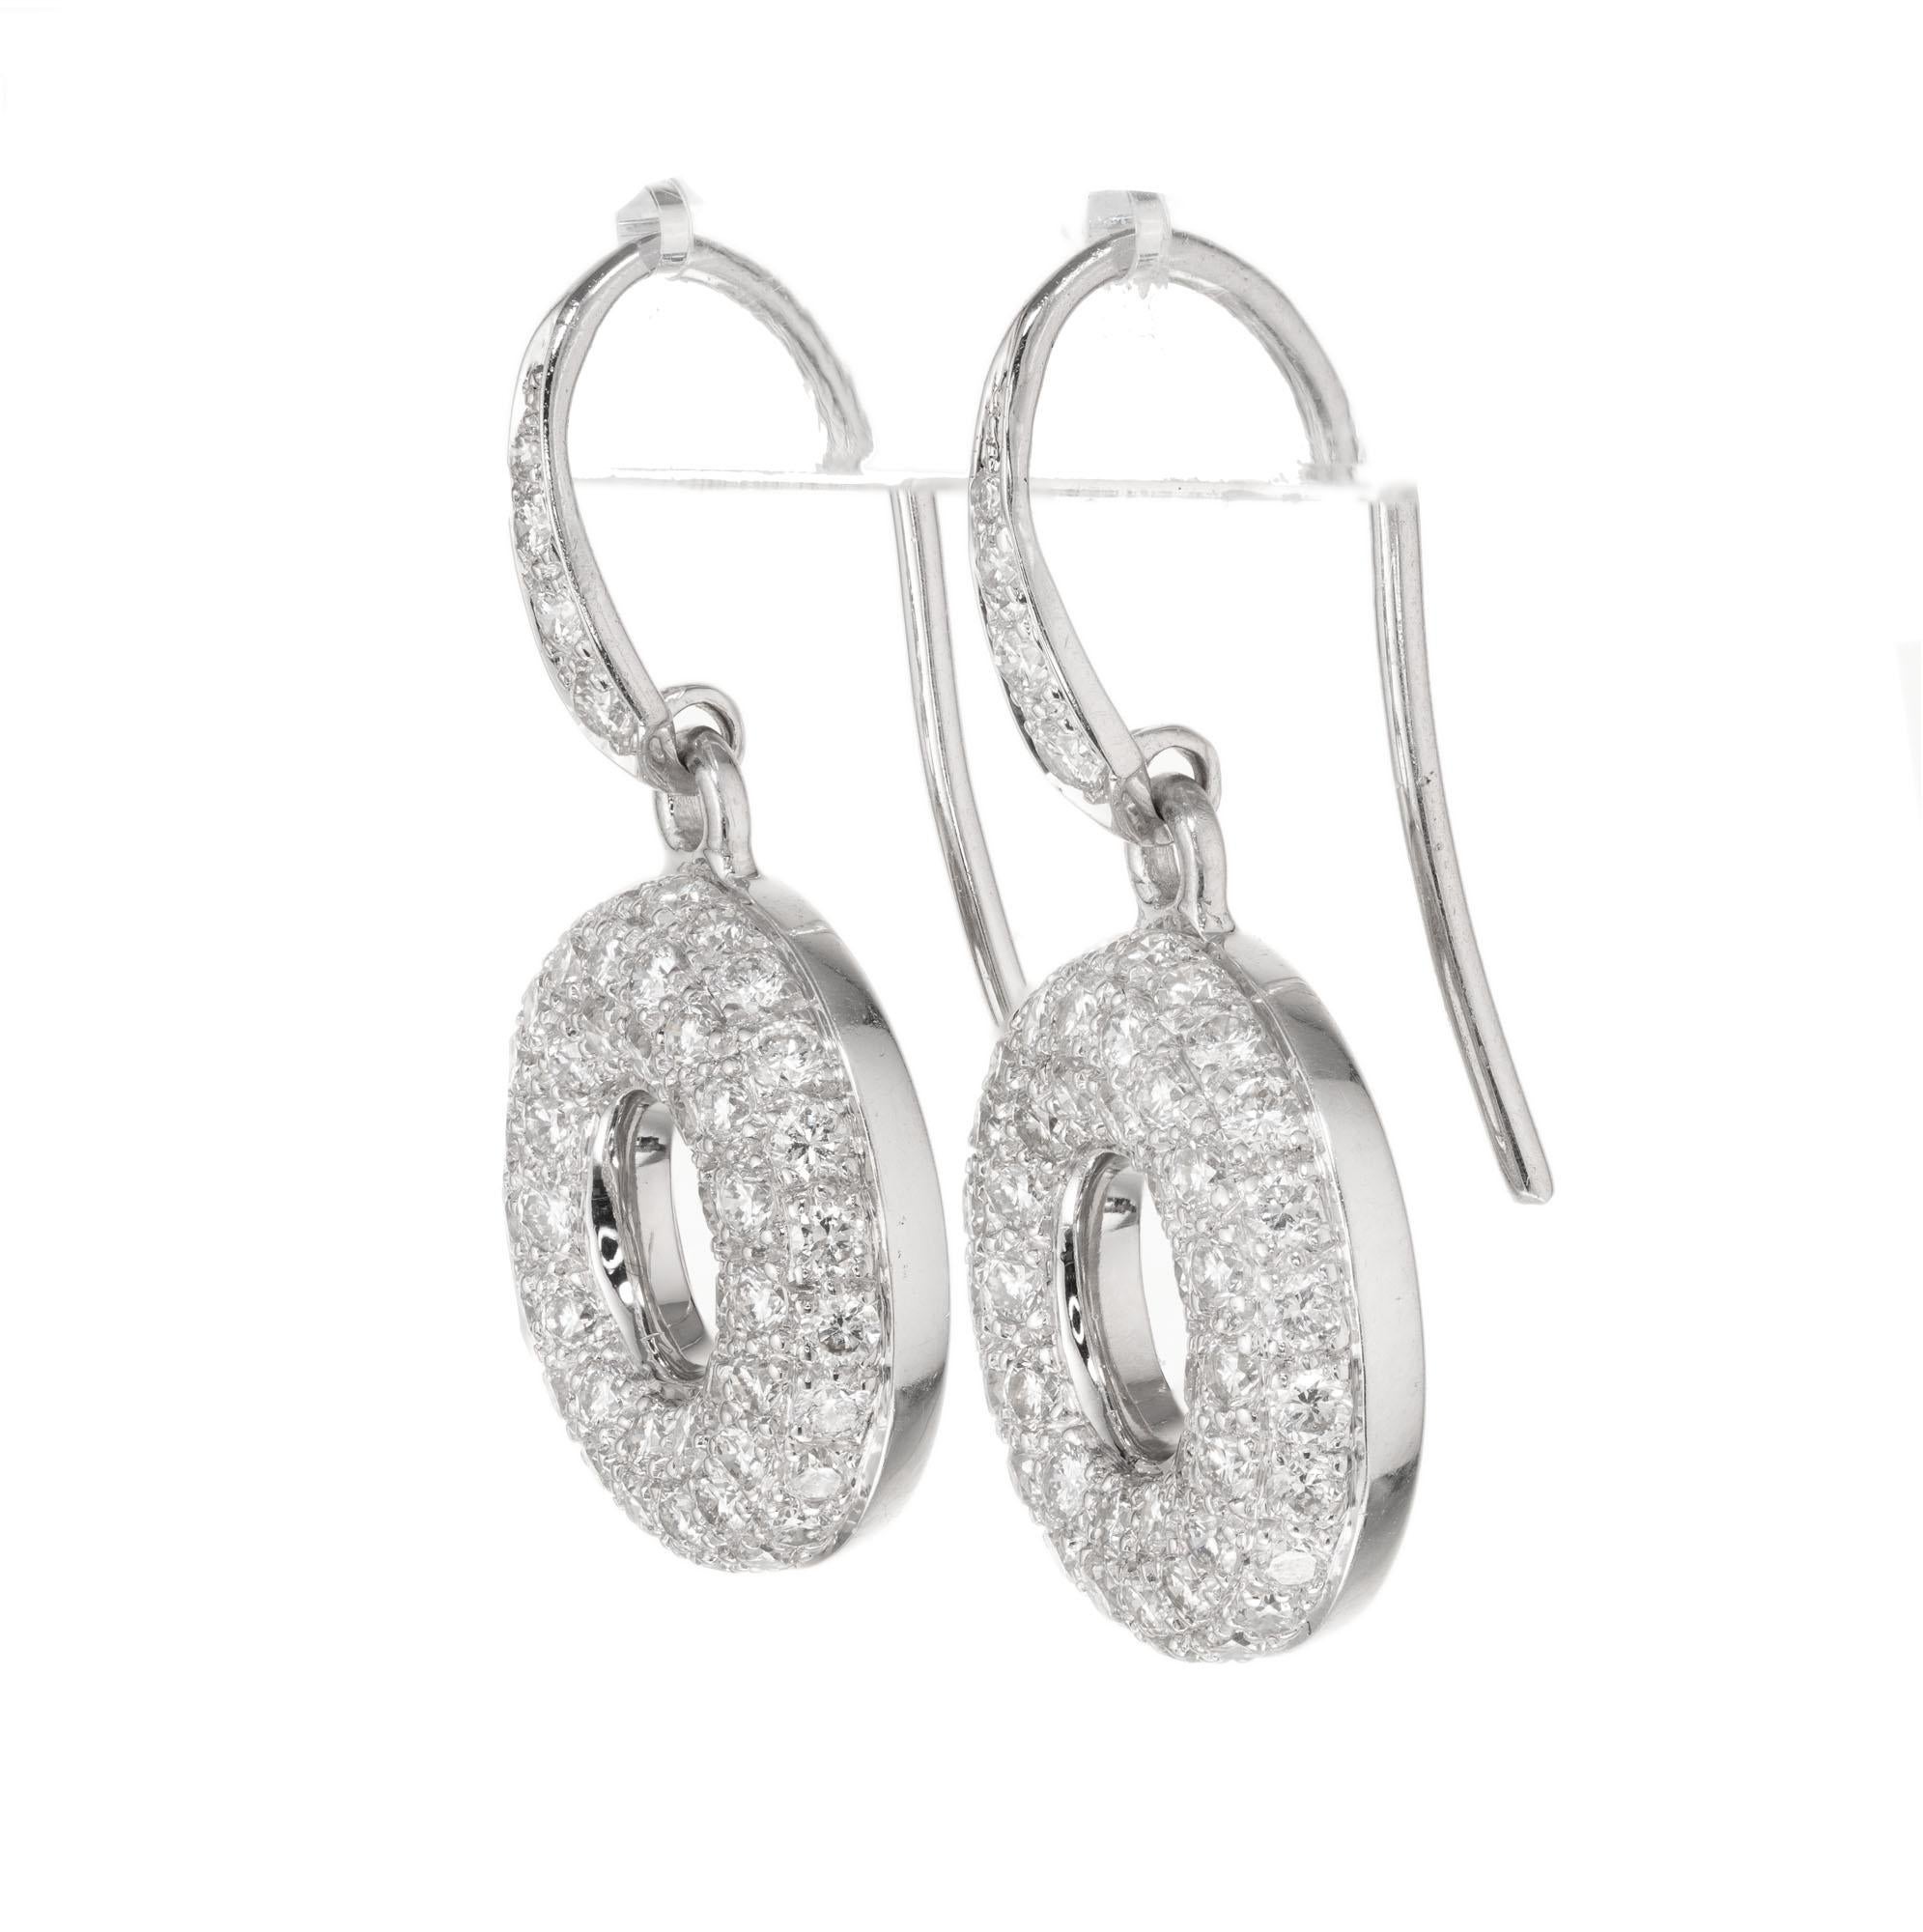 Diamond dangle earrings with round brilliant cut pave set diamonds. Open circle design suspended from graduating diamonds in 18k white gold.

116 round brilliant cut diamonds, G VS-SI approx. 1.45 total carat weight
18k white gold 
Stamped: 18k
5.4